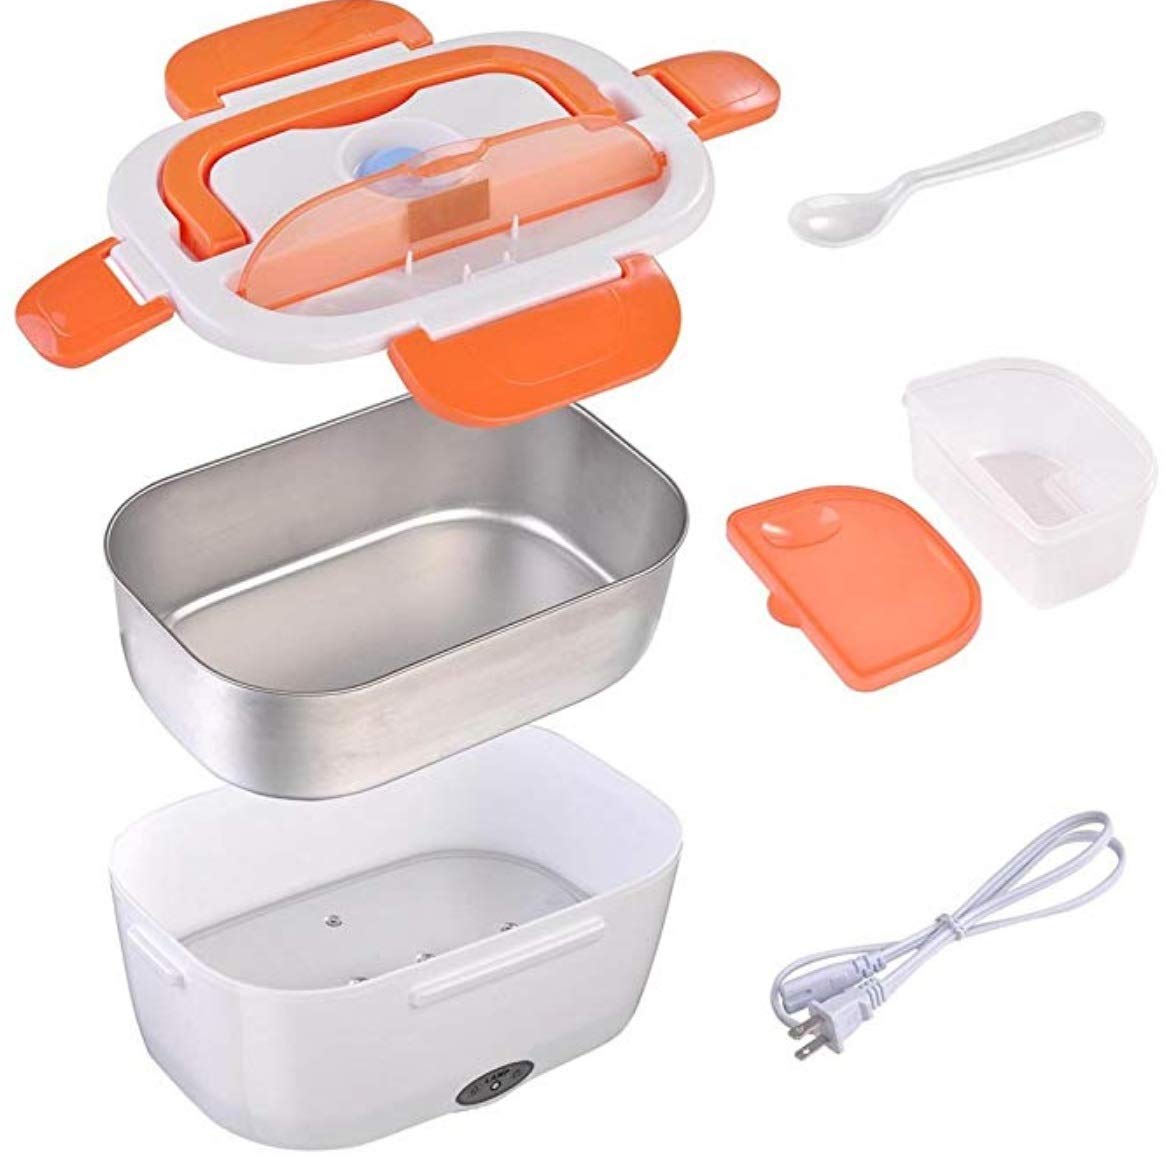 Electric Lunch Box & Food Warmer freeshipping - Dealz4all Store